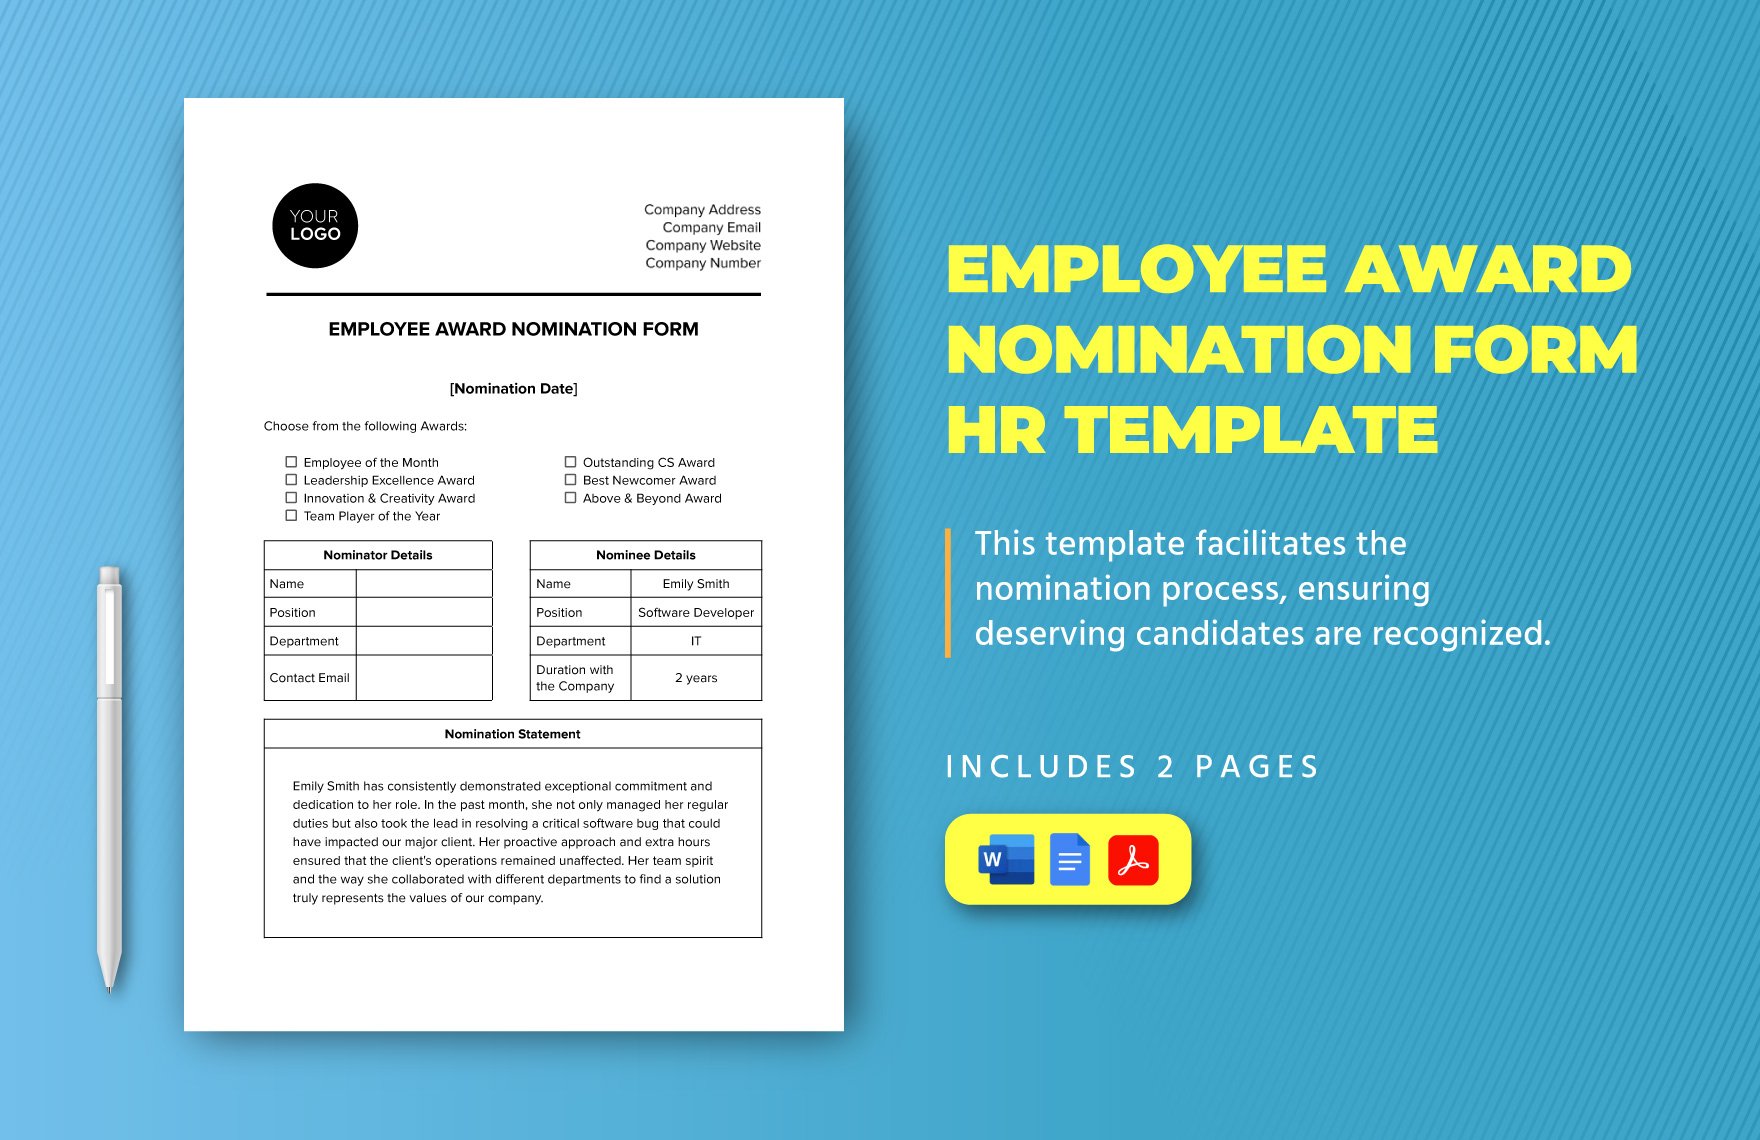 Employee Award Nomination Form HR Template in Word, Google Docs, PDF